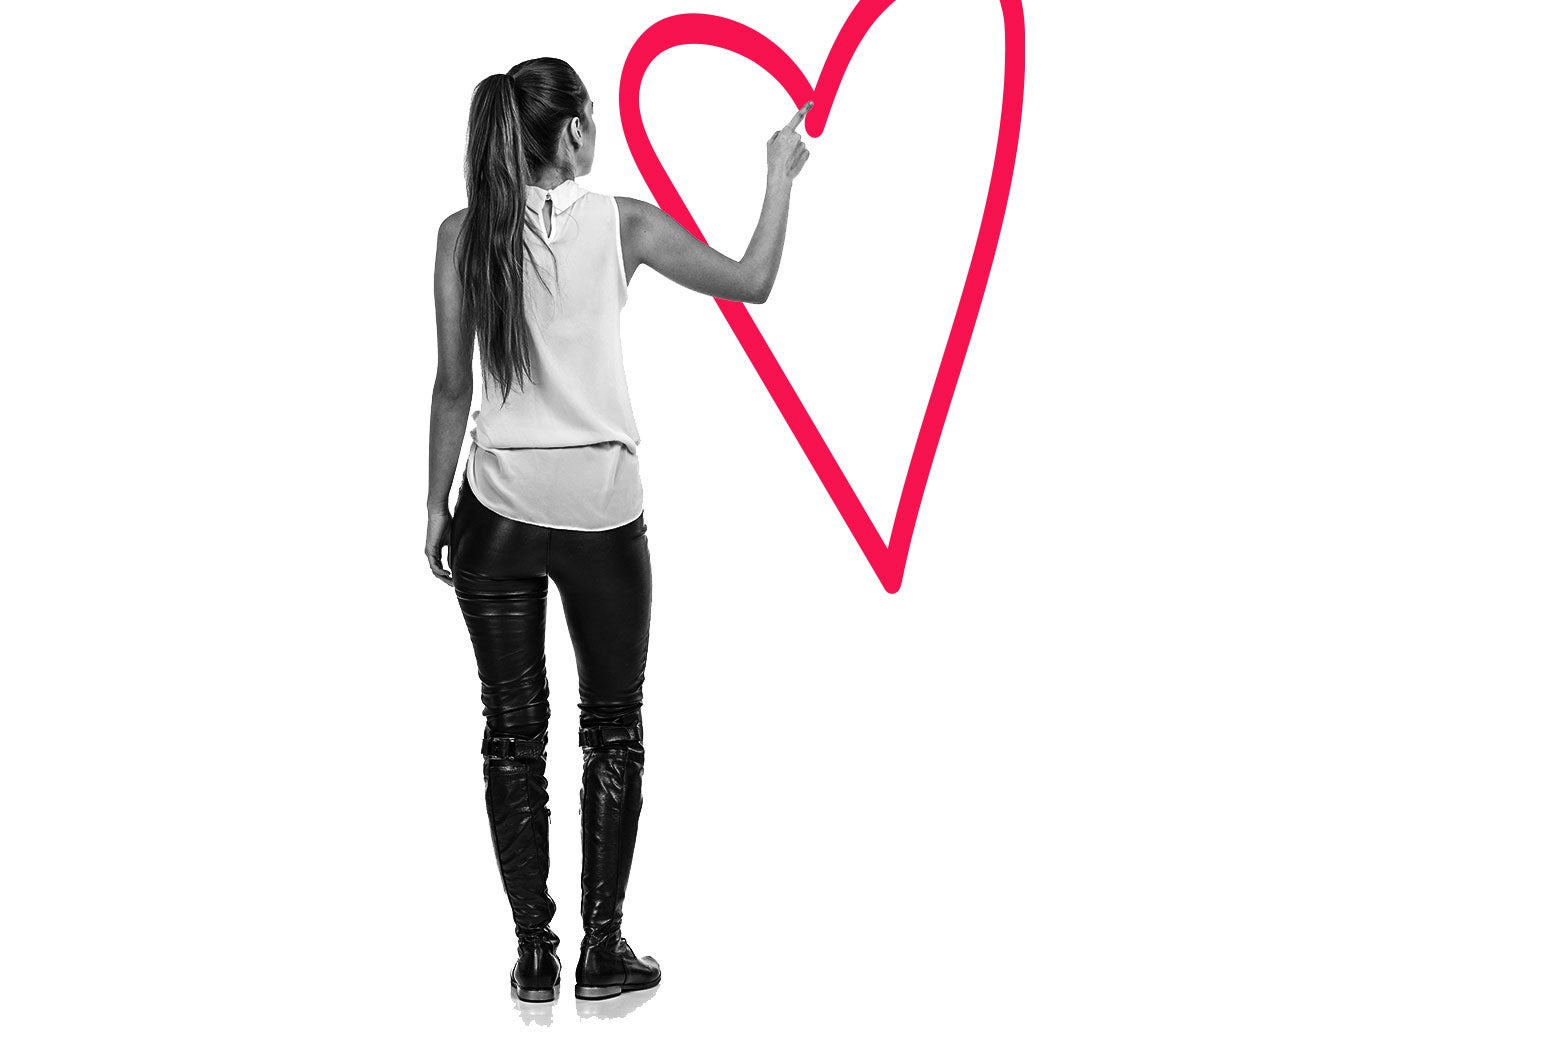 A person standing with their back to the camera draws an illustrated heart with their finger.